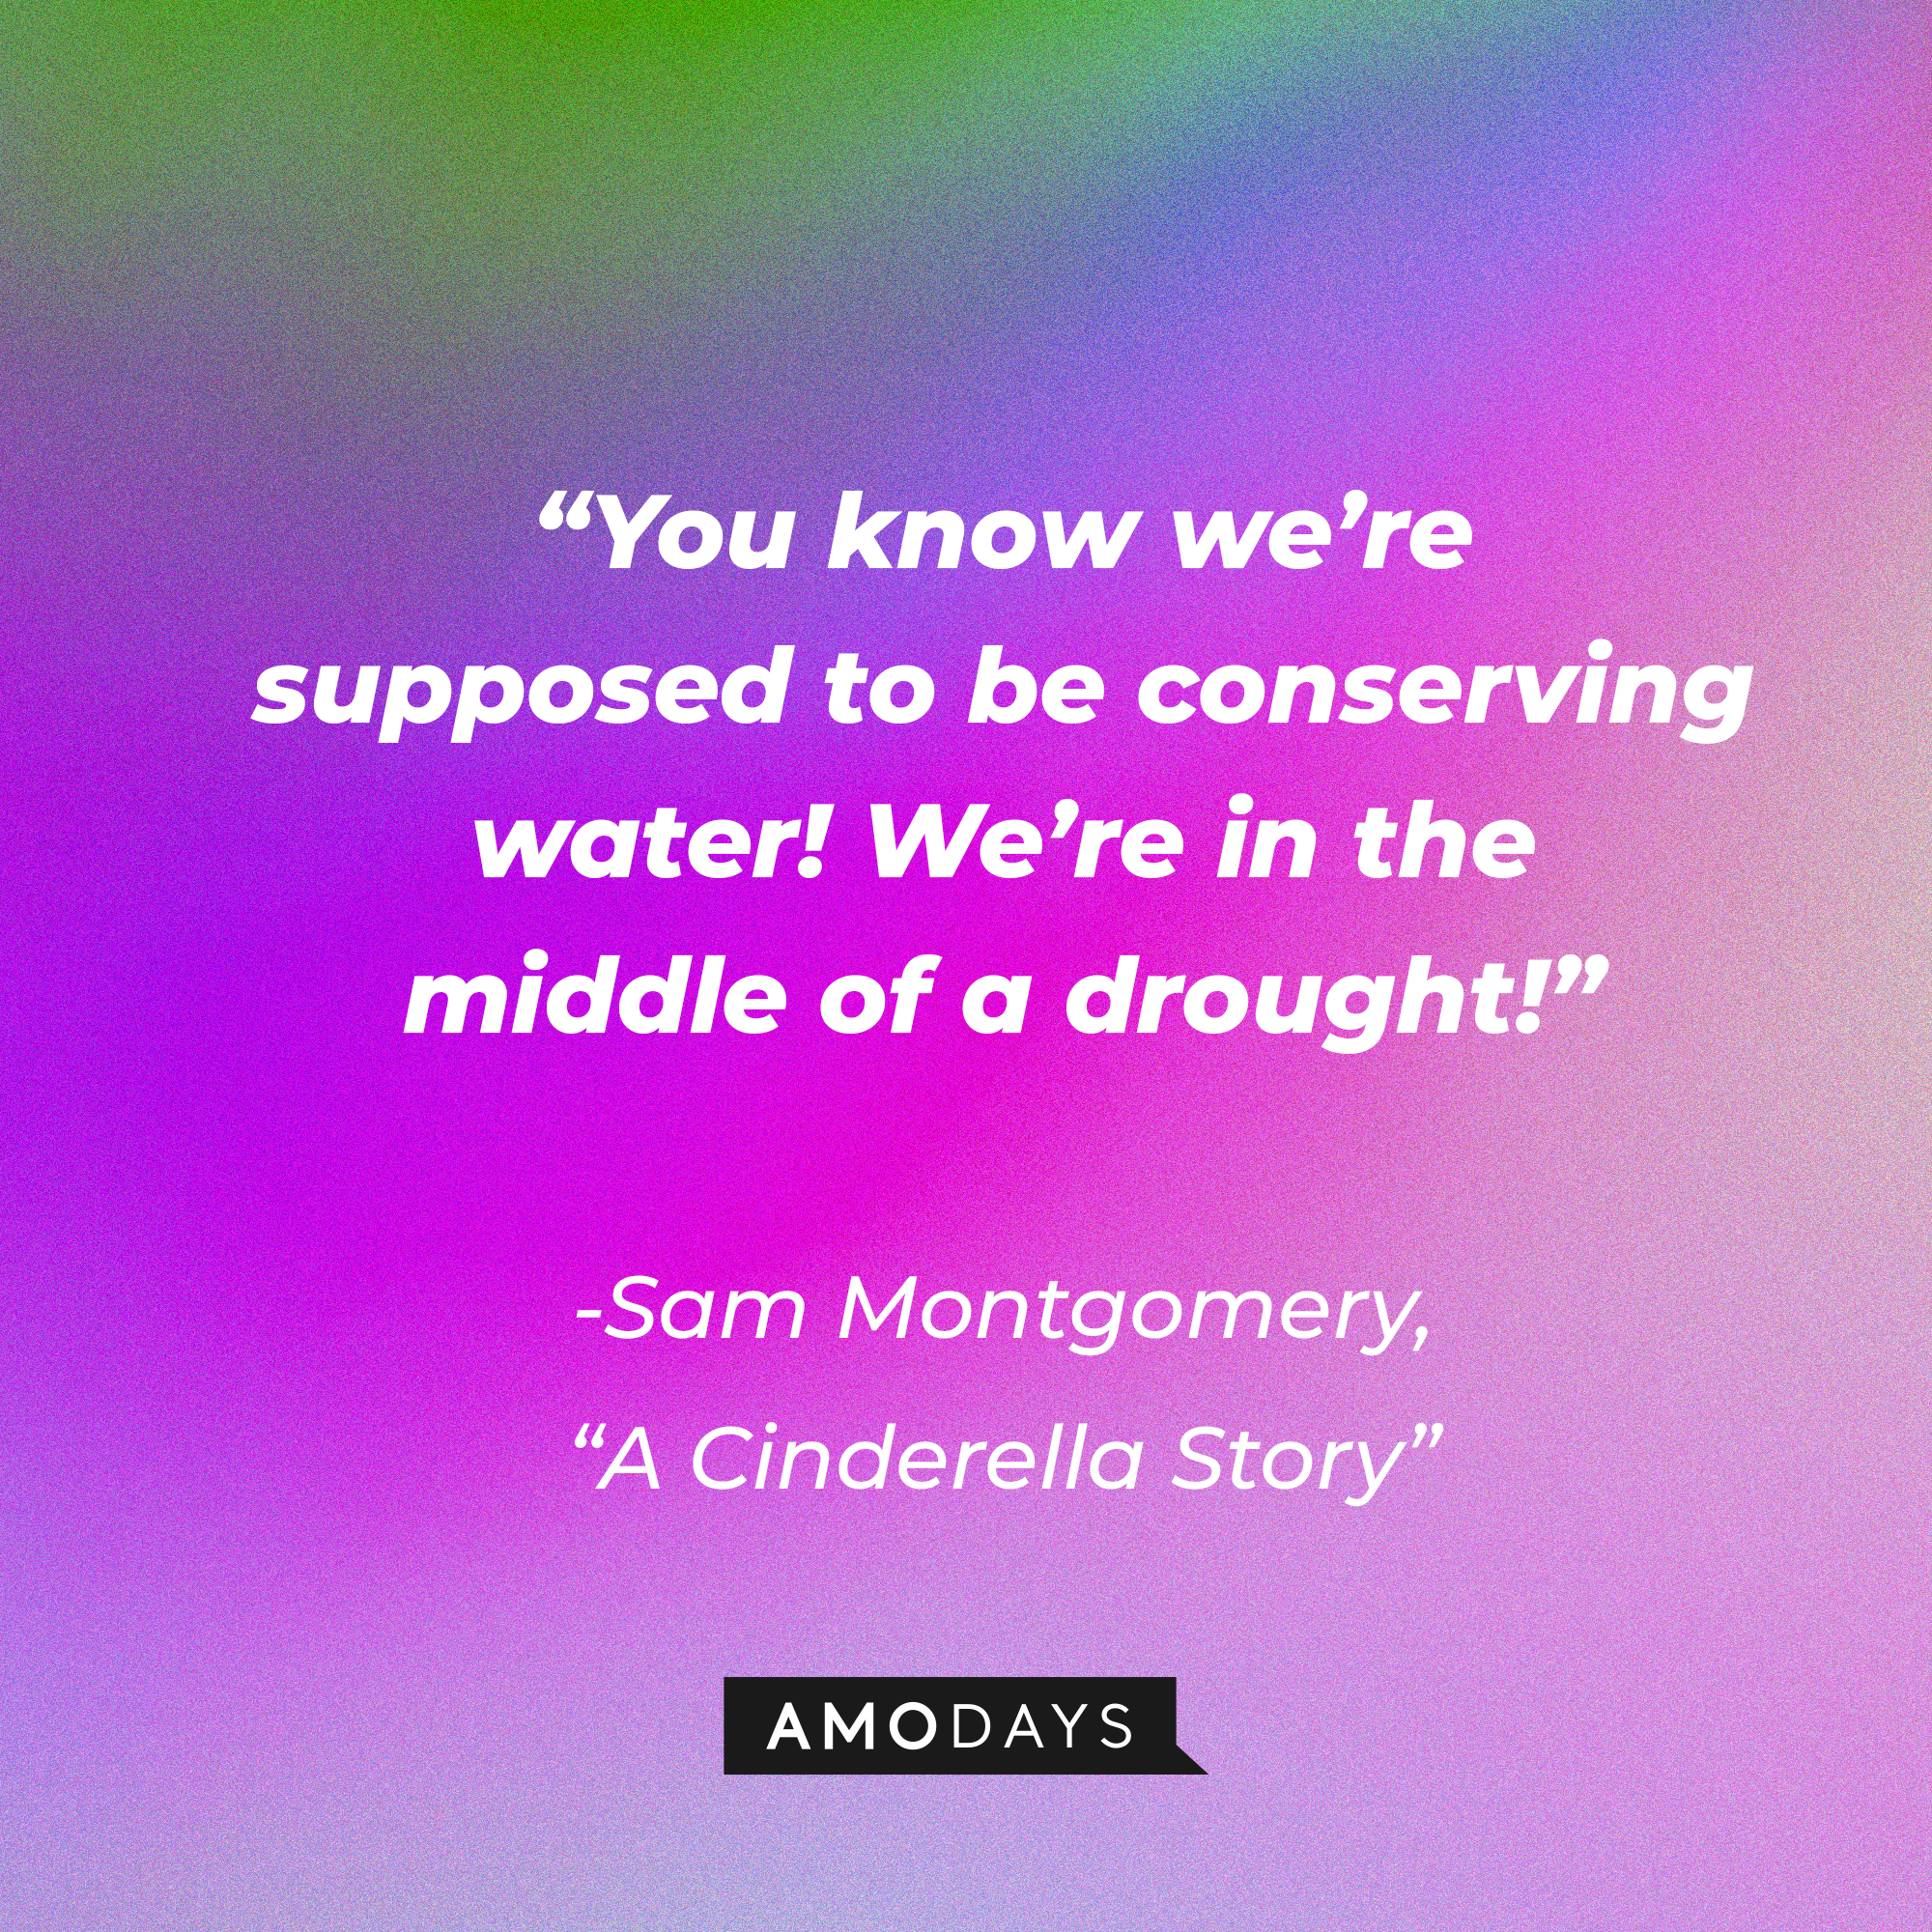 Sam Montgomery's quote from "A Cinderella Story:" “You know we’re supposed to be conserving water! We’re in the middle of a drought!” | Source: Youtube.com/warnerbrosentertainment